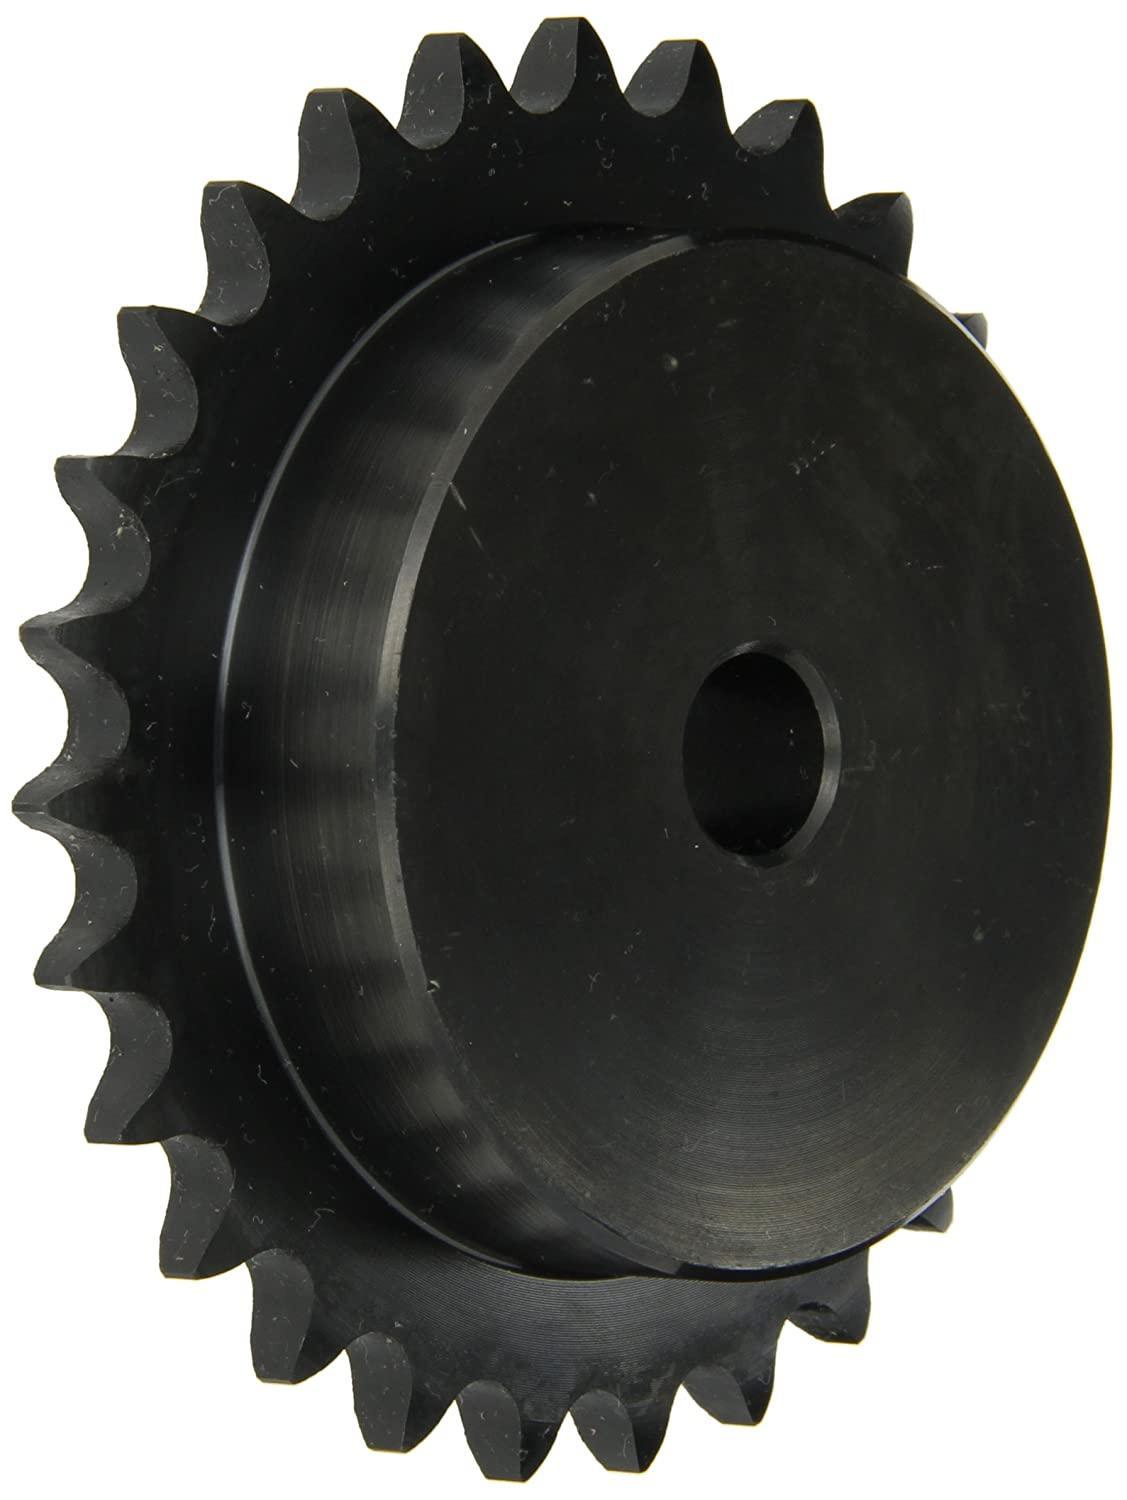 25B15 Roller Chain Sprocket With Stock Bore - Forces Inc